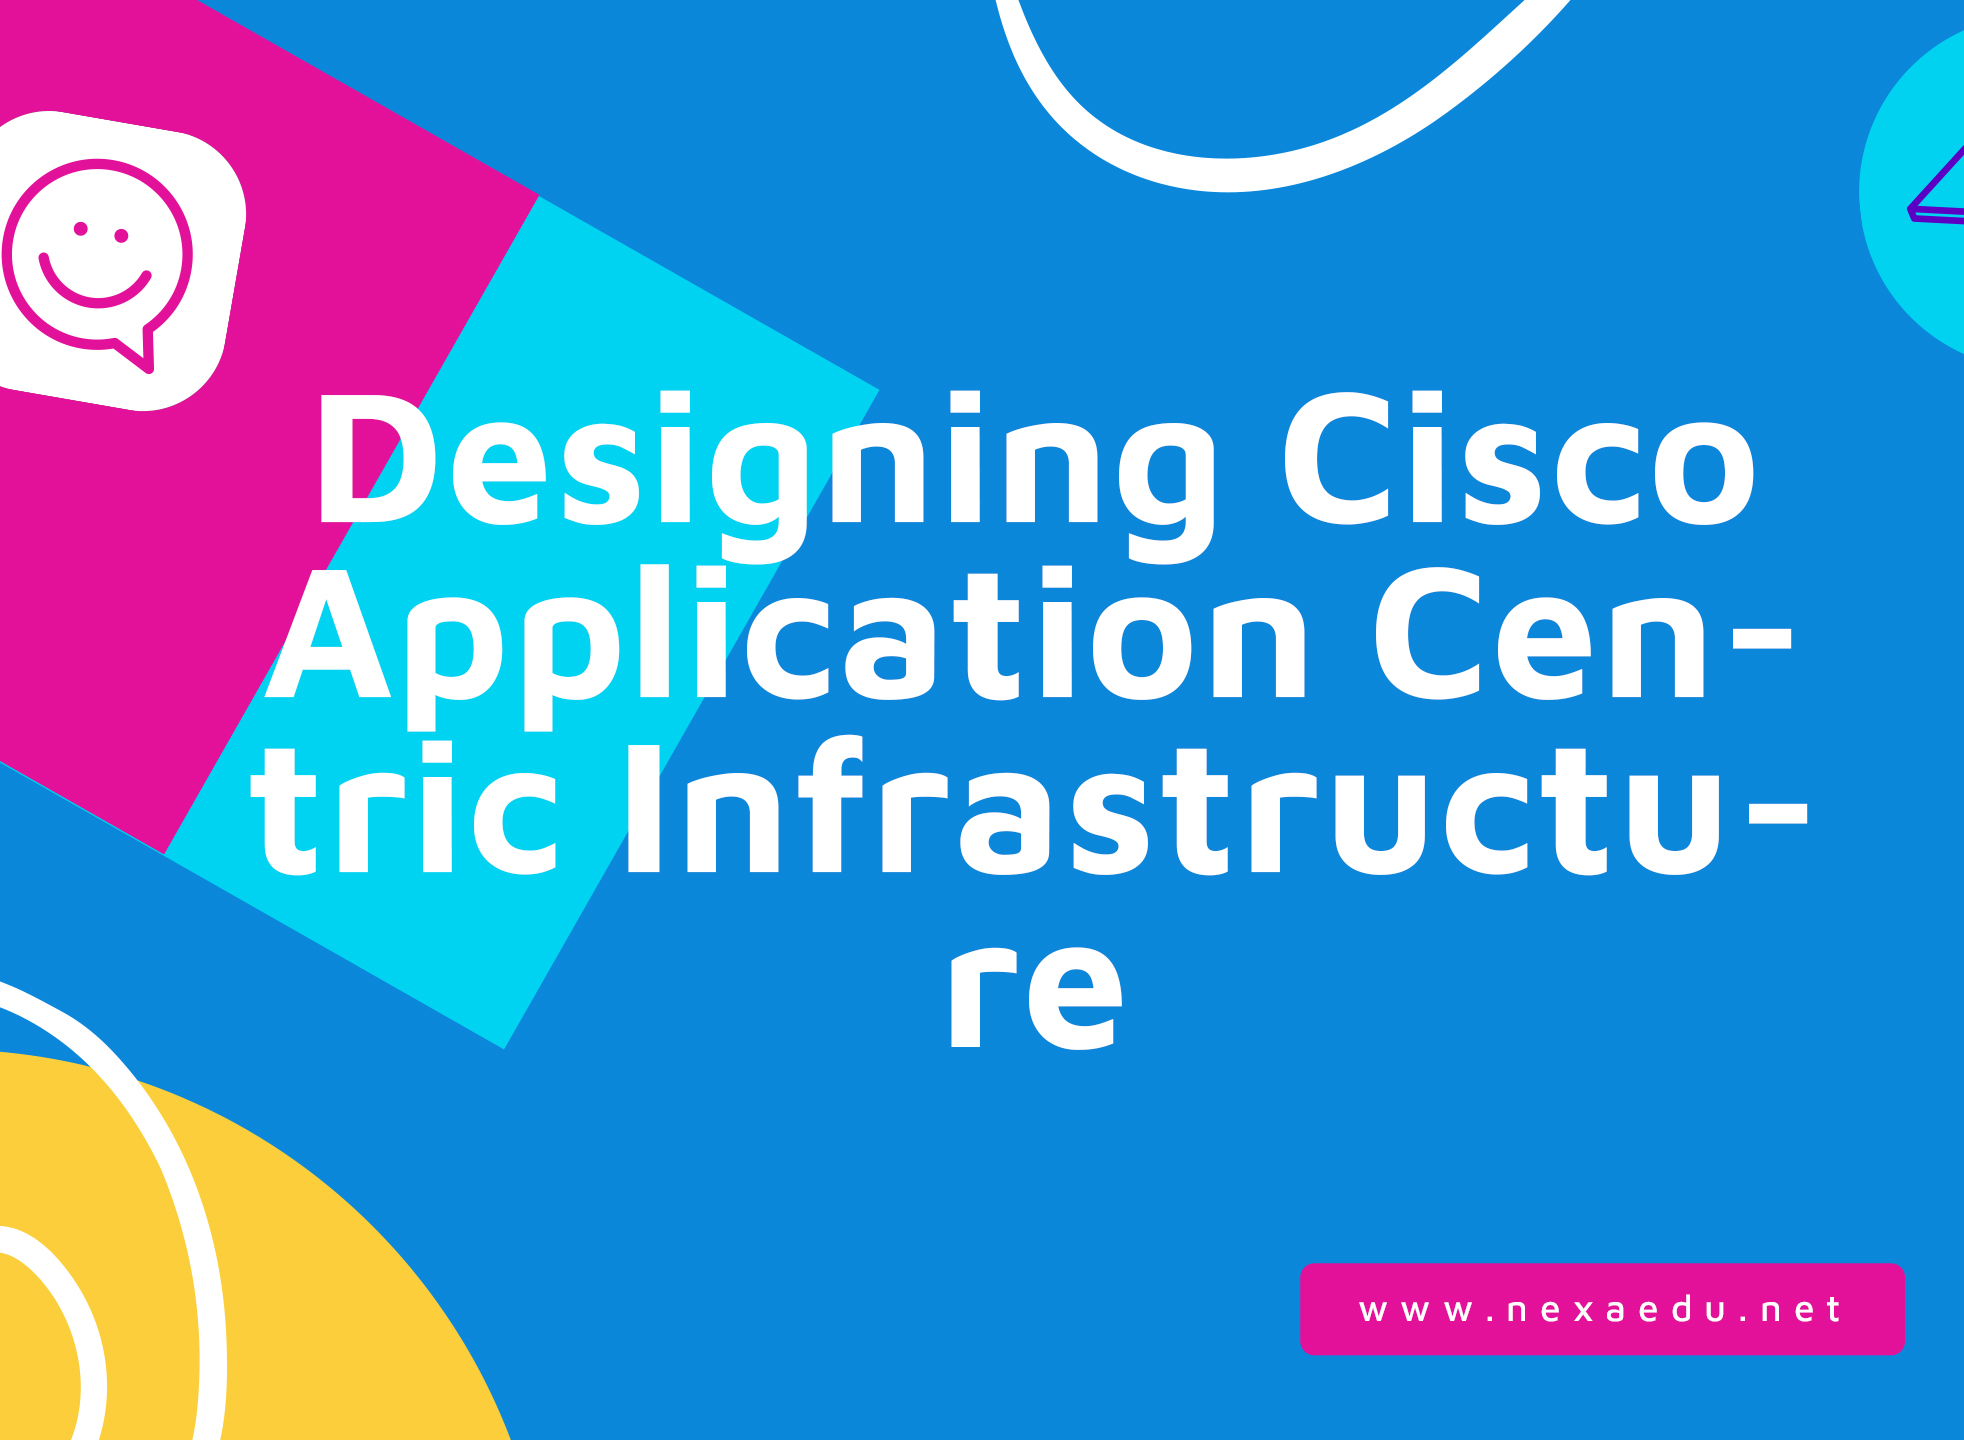 Designing Cisco Application Centric Infrastructure